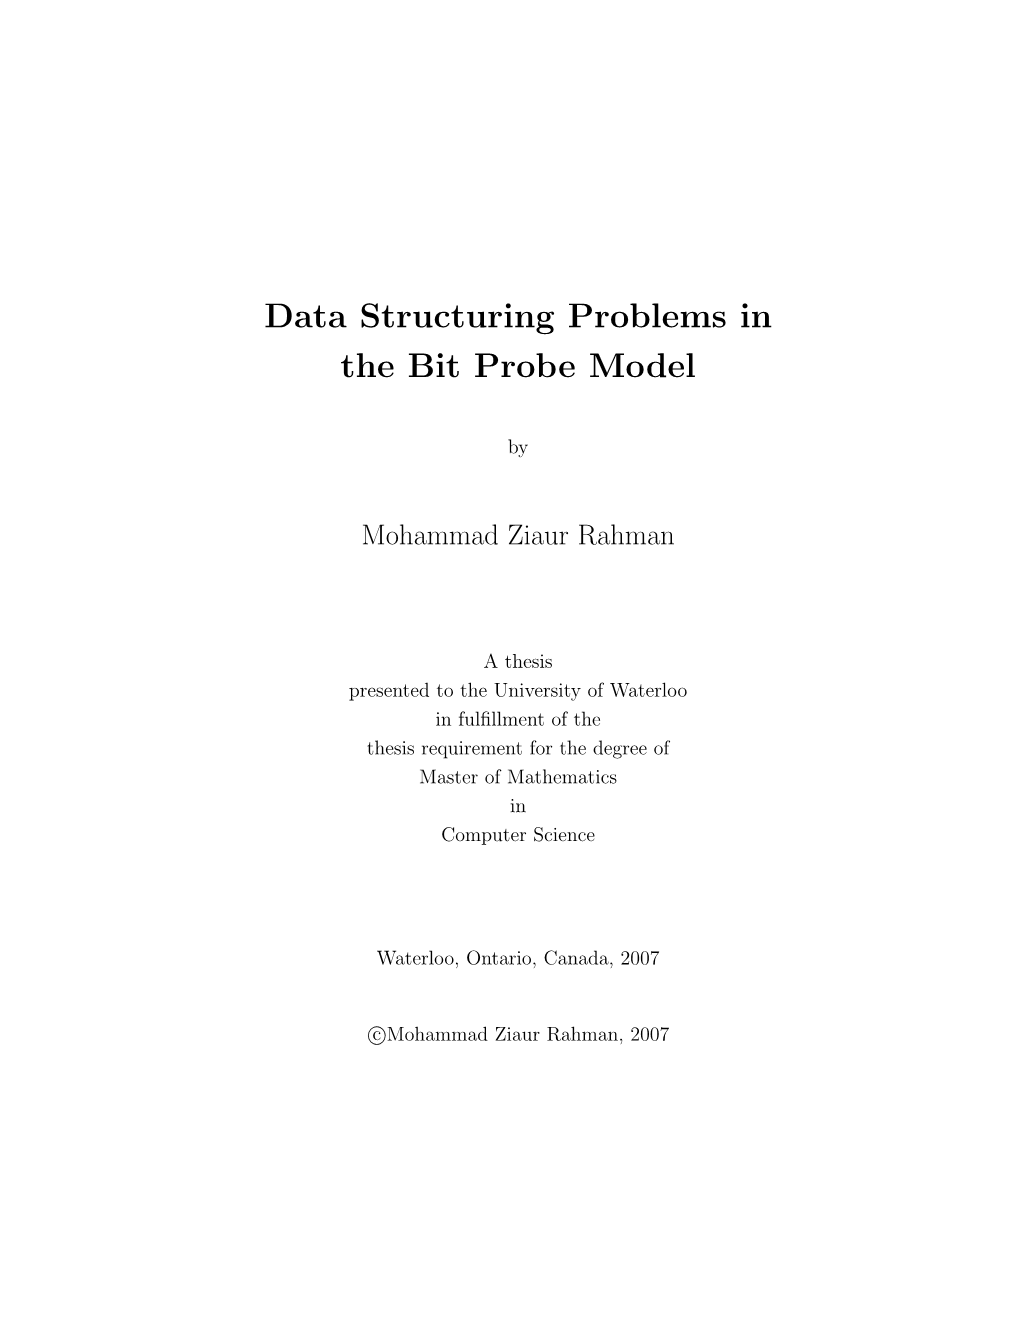 Data Structuring Problems in the Bit Probe Model